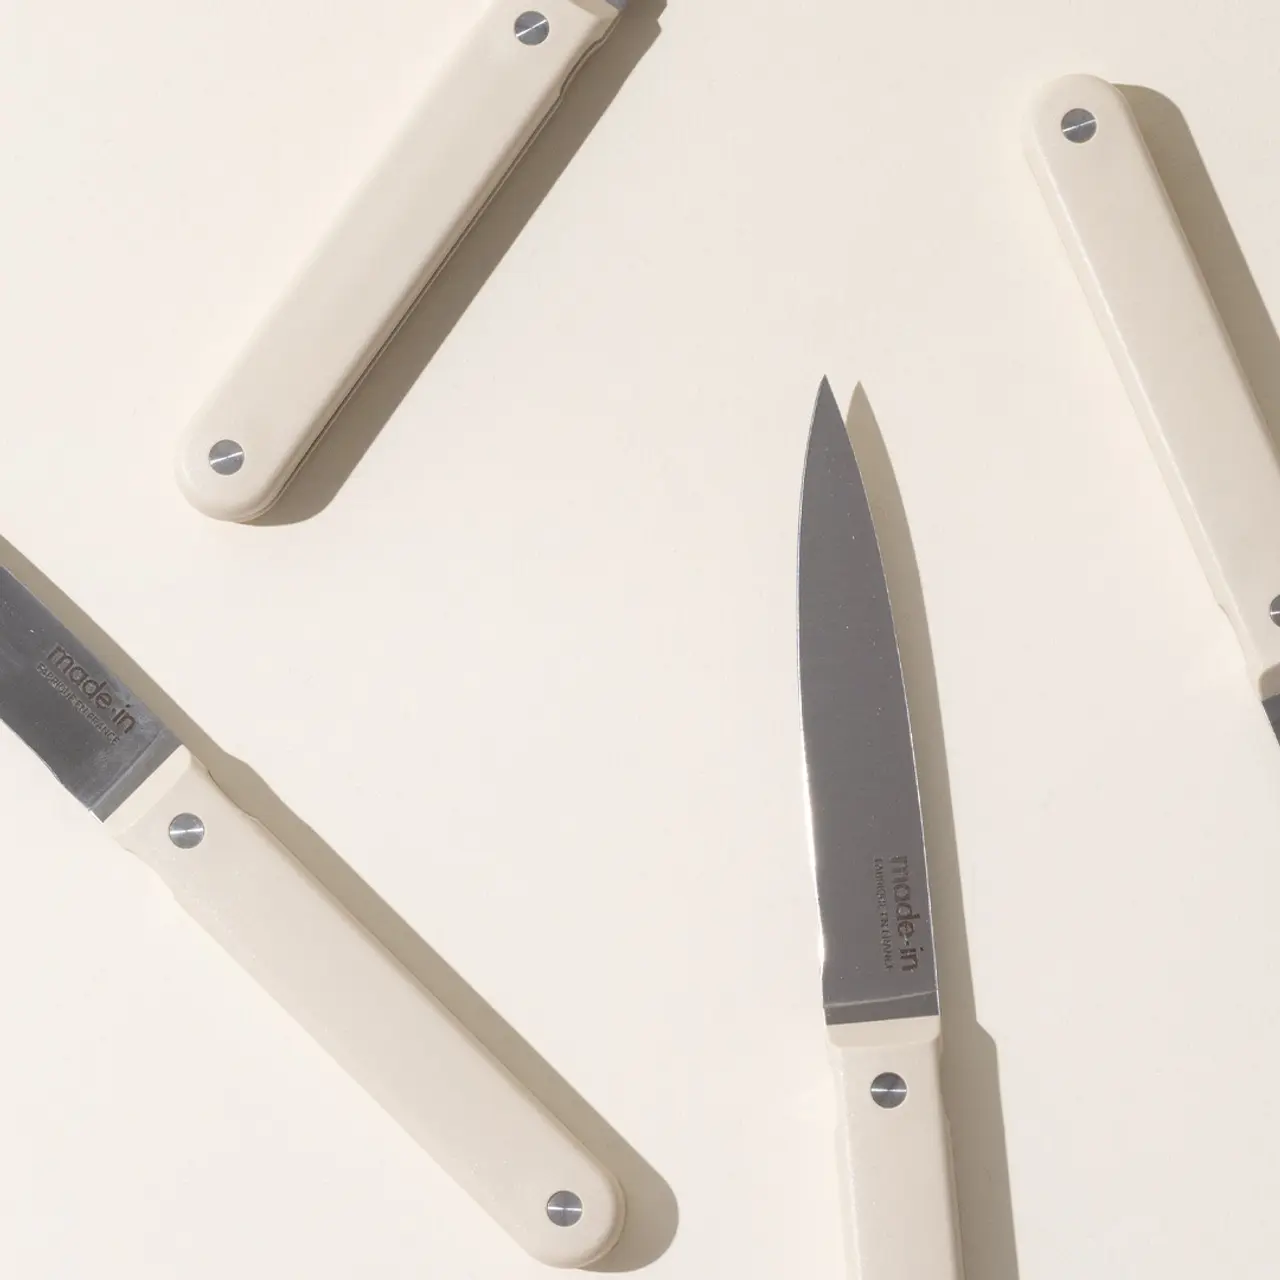 Four folding knives with ivory-colored handles are placed at different angles on a plain surface.